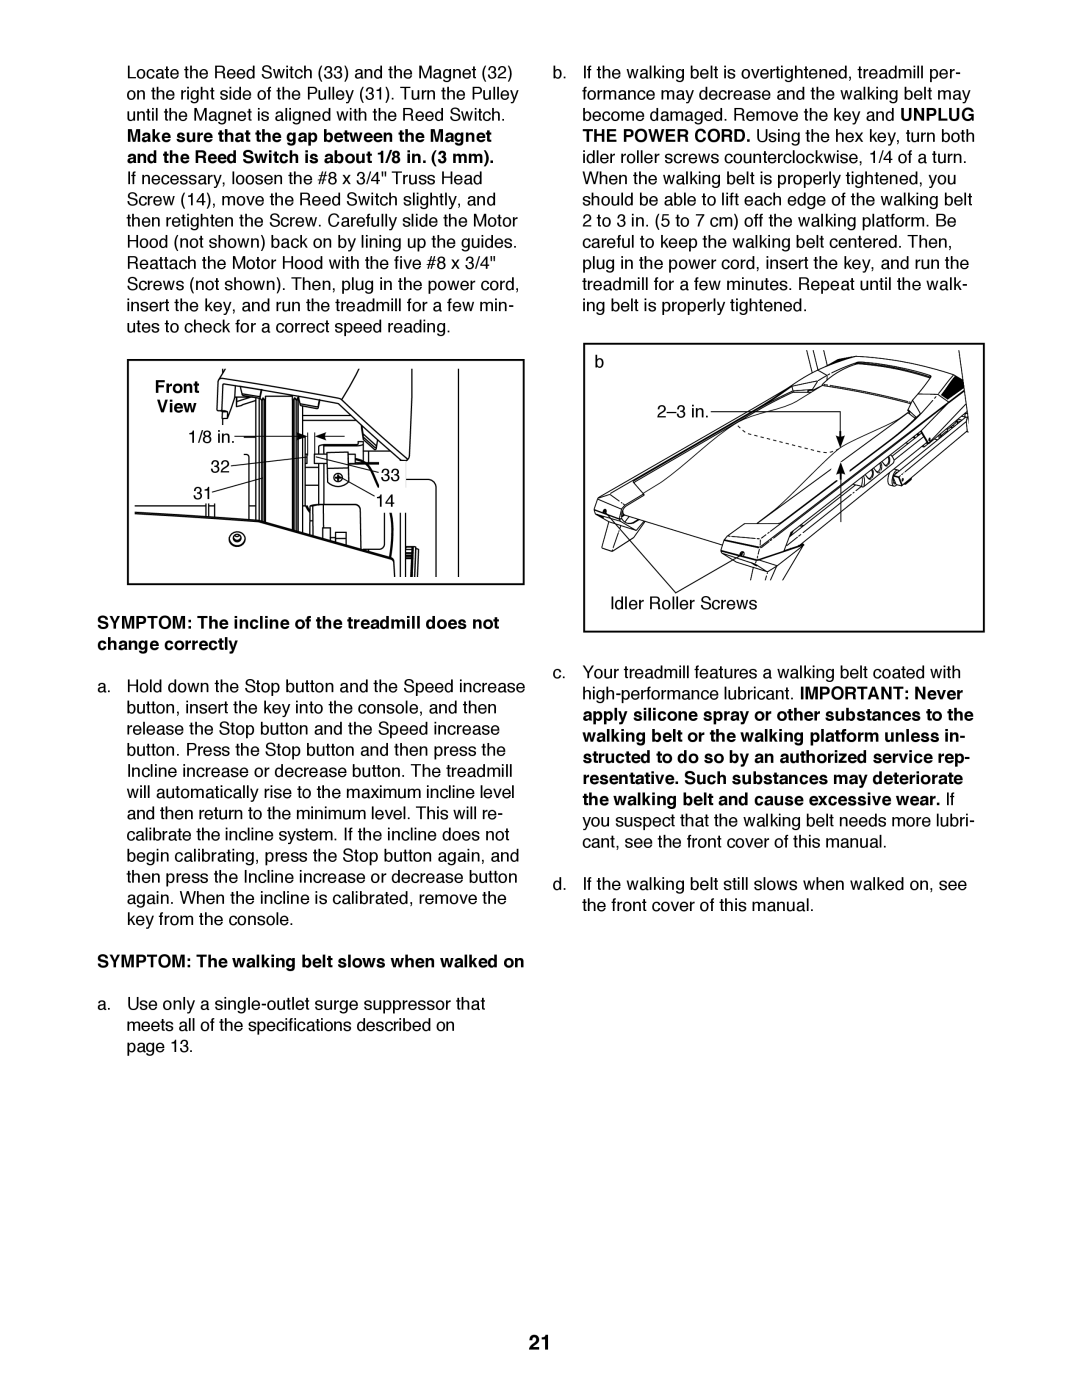 ProForm 397 user manual Front View, SYMPTOM The incline of the treadmill does not change correctly 